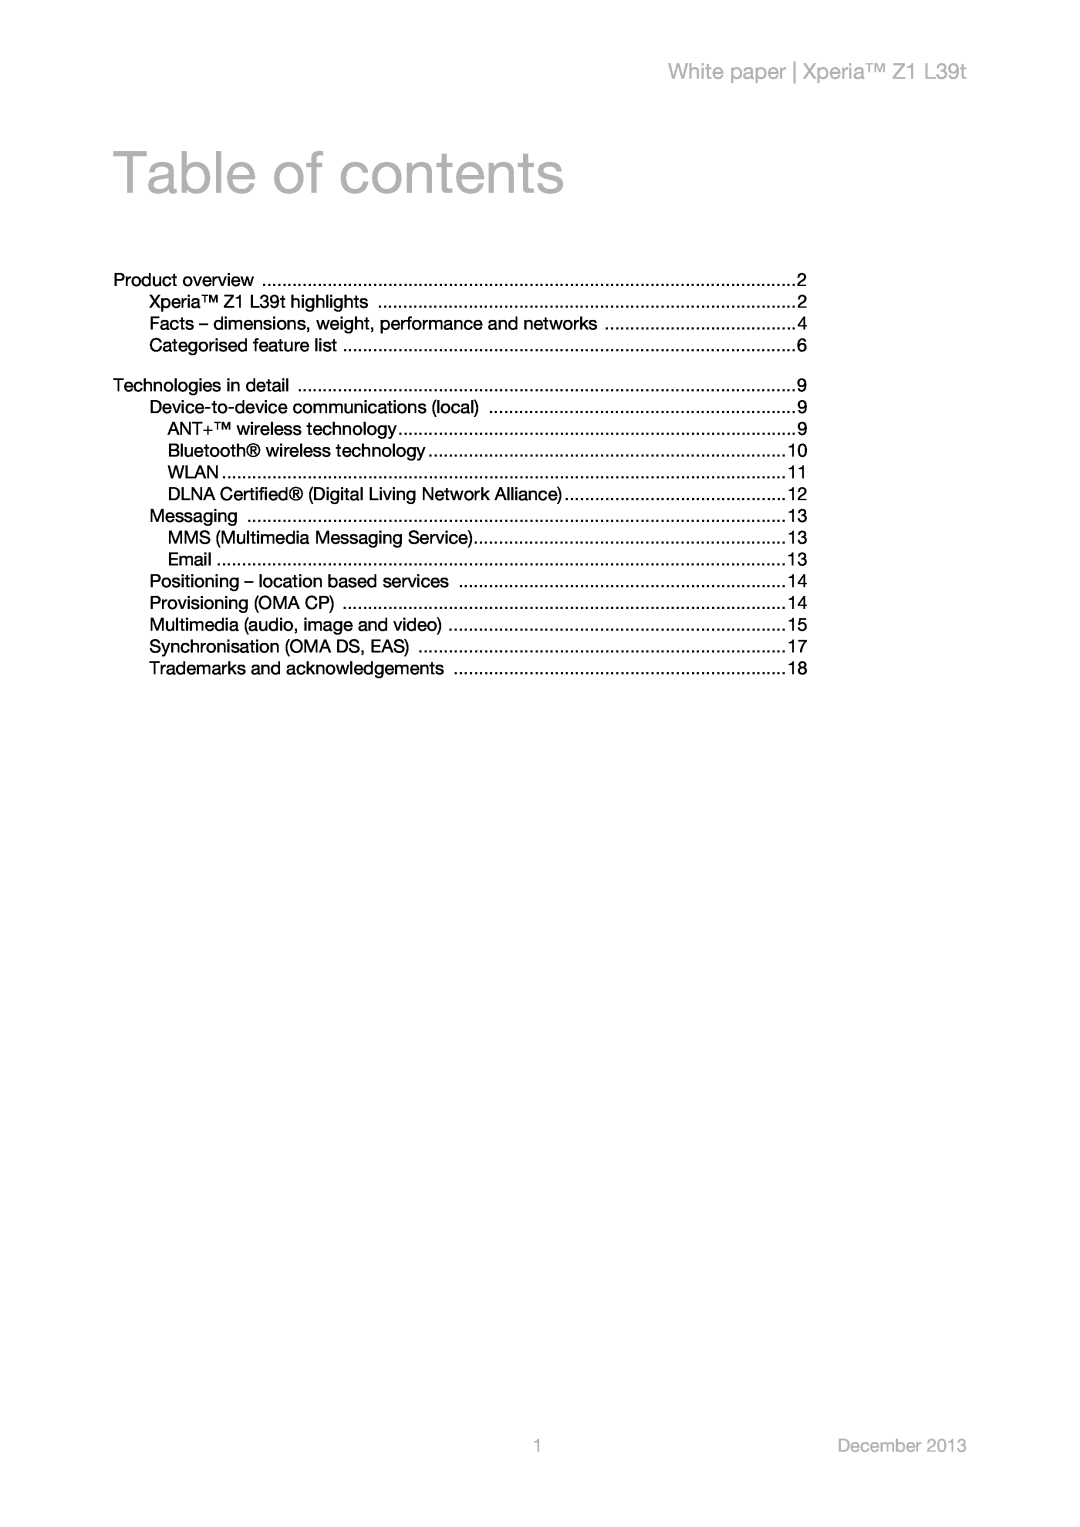 Sony manual Table of contents, White paper Xperia Z1 L39t, December 